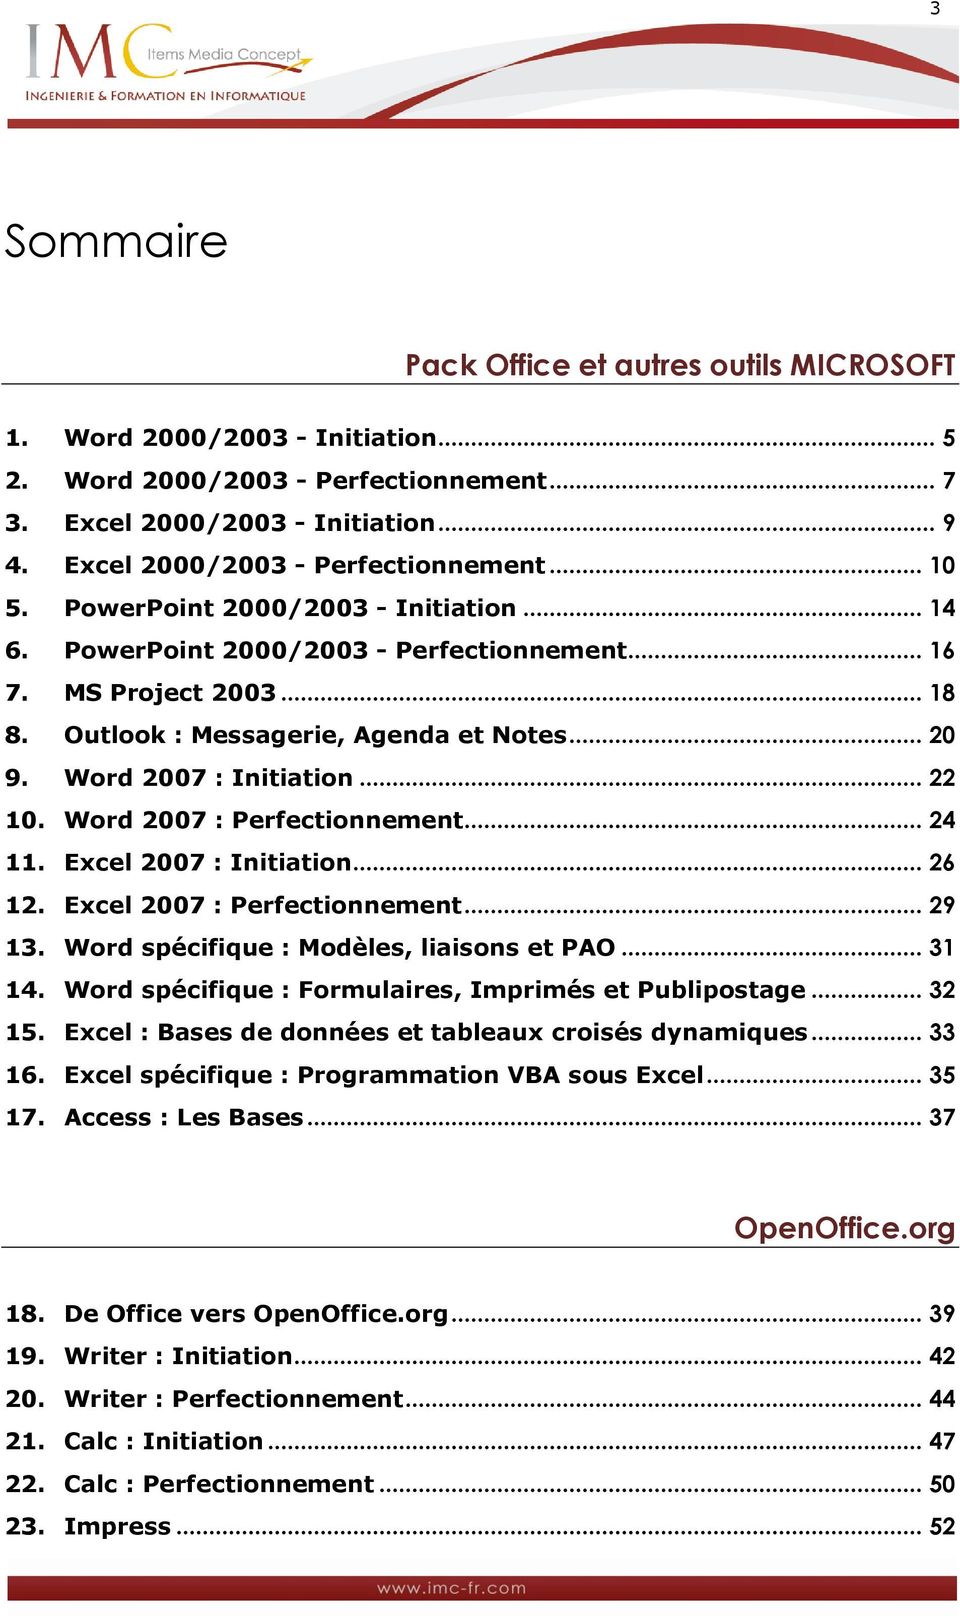 .. 20 9. Word 2007 : Initiation... 22 10. Word 2007 : Perfectionnement... 24 11. Excel 2007 : Initiation... 26 12. Excel 2007 : Perfectionnement... 29 13. Word spécifique : Modèles, liaisons et PAO.